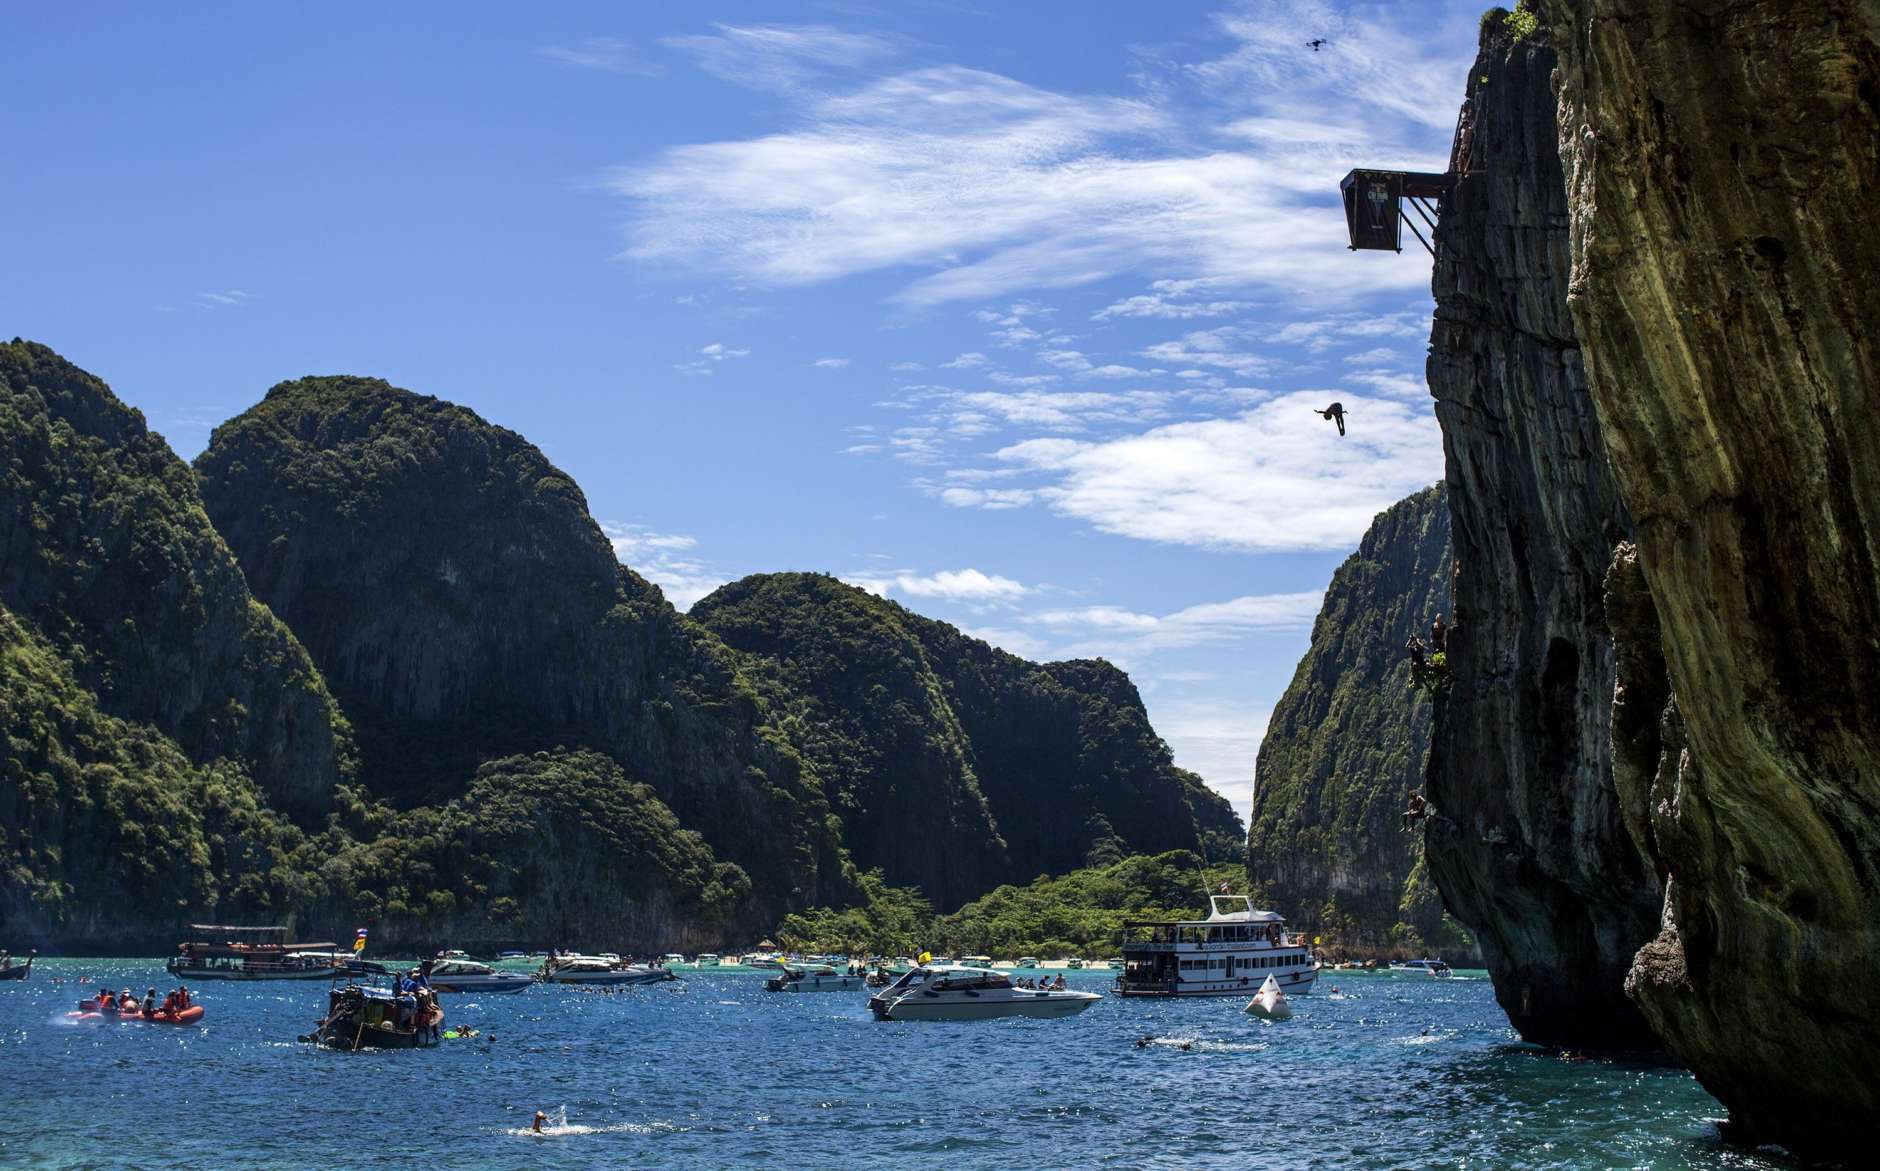 PHI PHI ISLAND, THAILAND - OCTOBER 22:  (EDITORIAL USE ONLY) In this handout image provided by Red Bull, Gary Hunt of the UK dives from the 27 metre platform at Maya Bay in the Andaman Sea during the final stop of the 2013 Red Bull Cliff Diving World Series on October 22, 2013 at Phi Phi Island, Thailand. (Photo by Romina Amato/Red Bull via Getty Images)